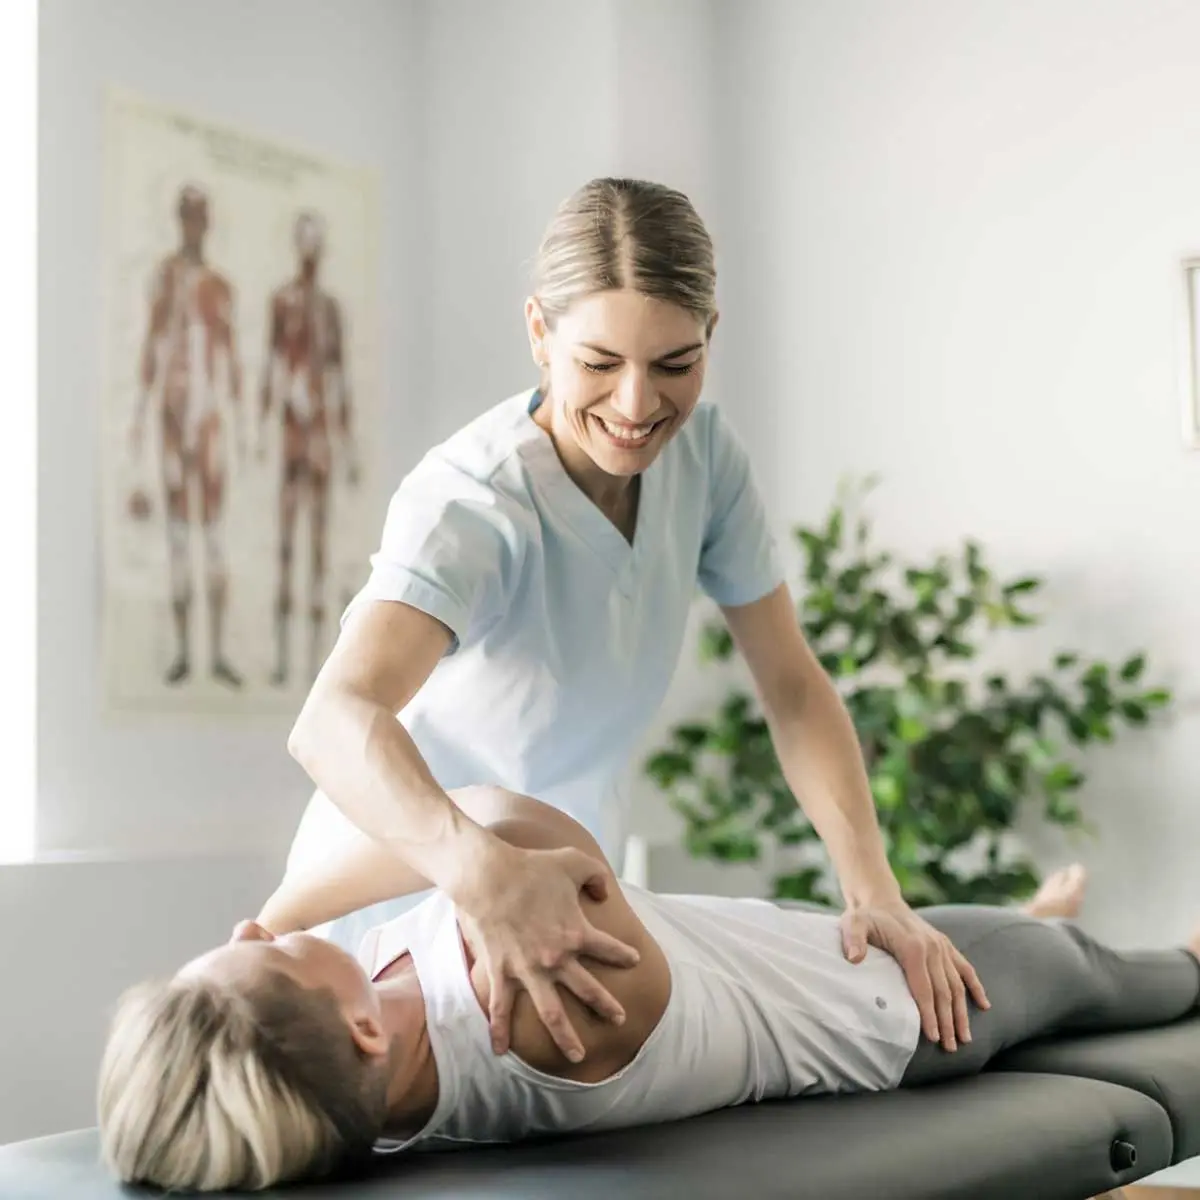 Chiropractor helping patient with back pain